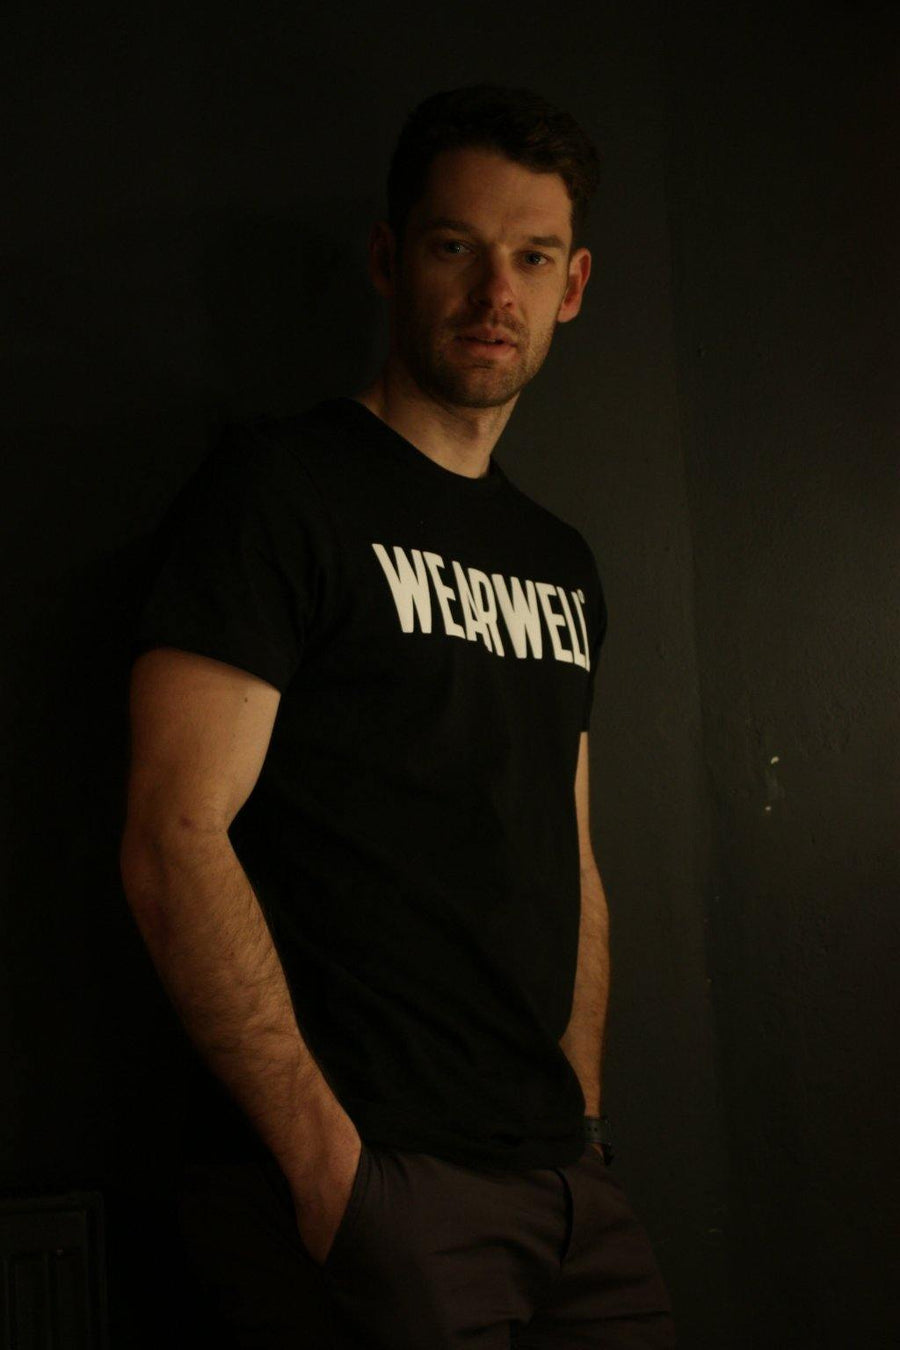 Team T-shirt Black | Men - Clubhouse Collection - T Shirt - Wearwell Cycle Company